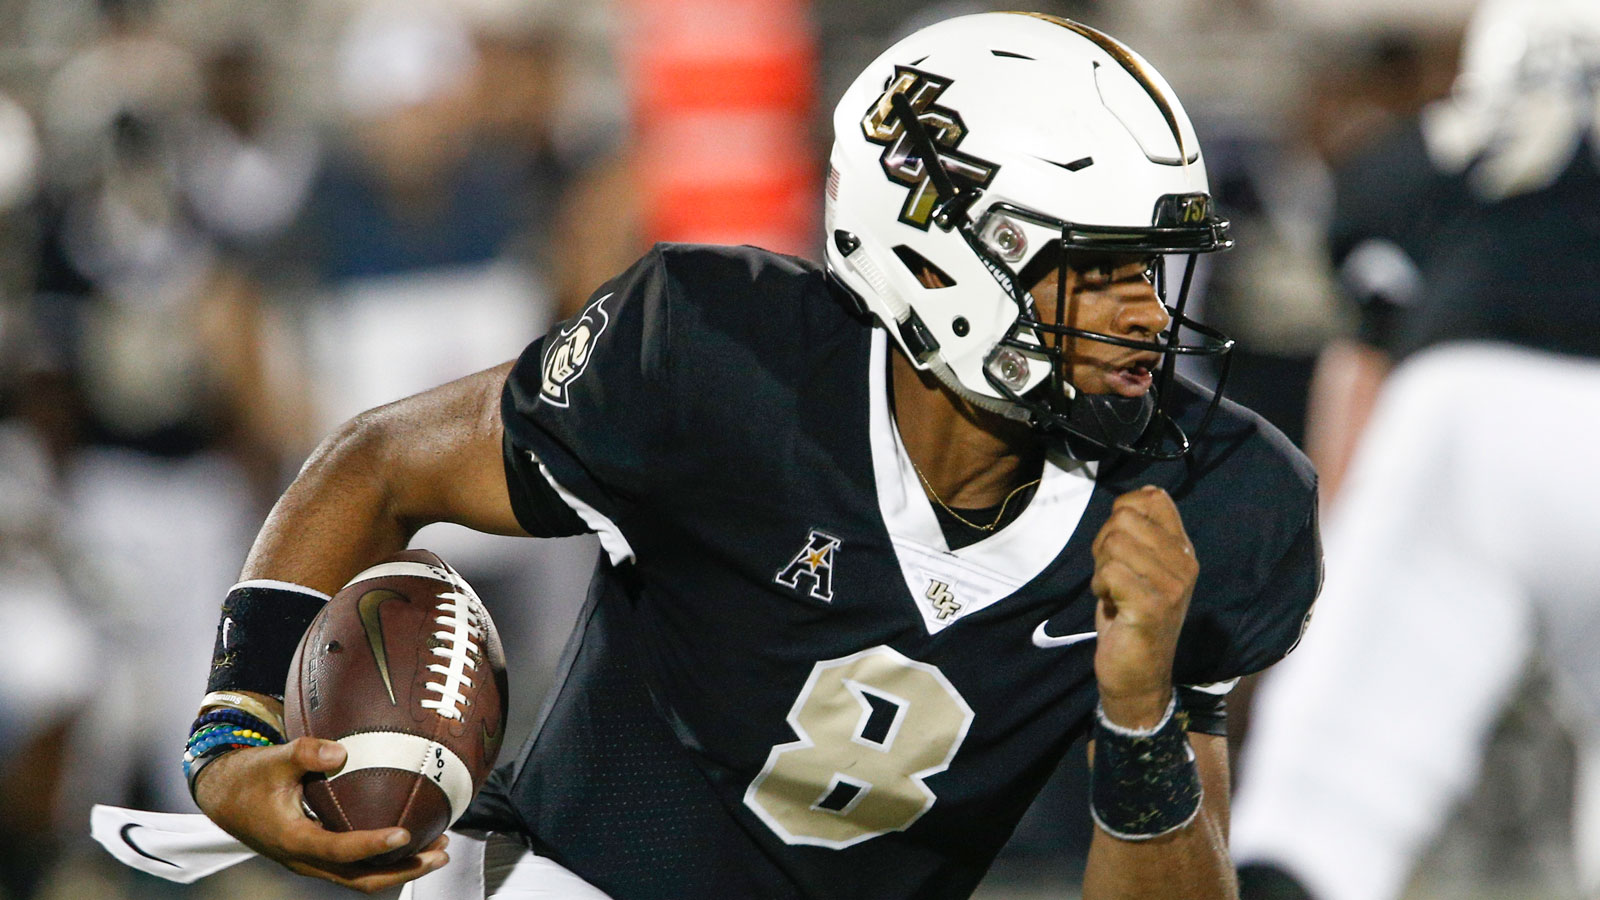 UCF moves to No. 18, UM to No. 21 in latest AP Poll